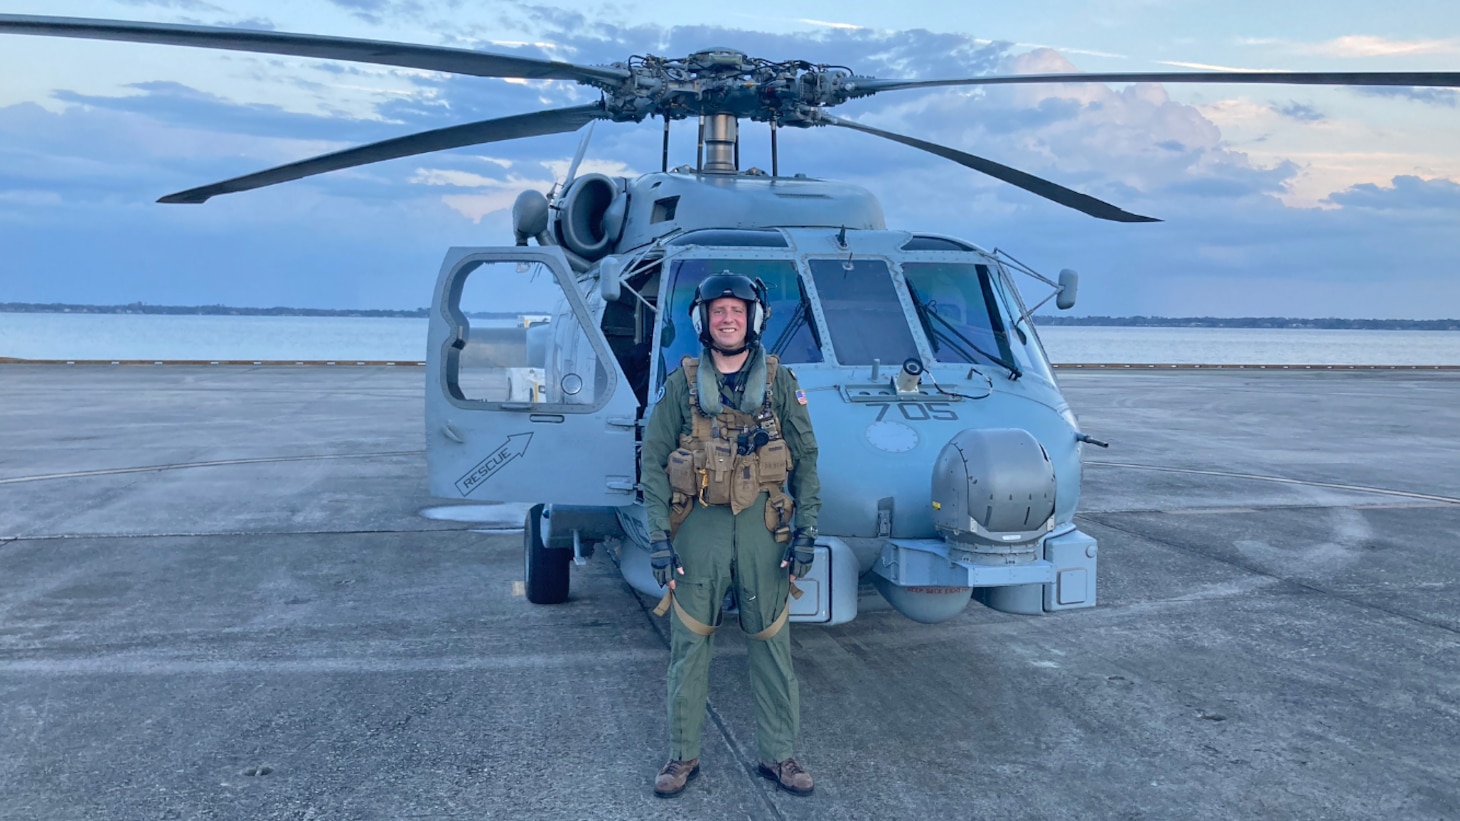 Lt. Cmdr. David Rozovski poses for a picture following his last flight in the MH-60R Seahawk marking the completion of his fleet utilization tour at Naval Air Station Jacksonville, Florida, in February 2021.